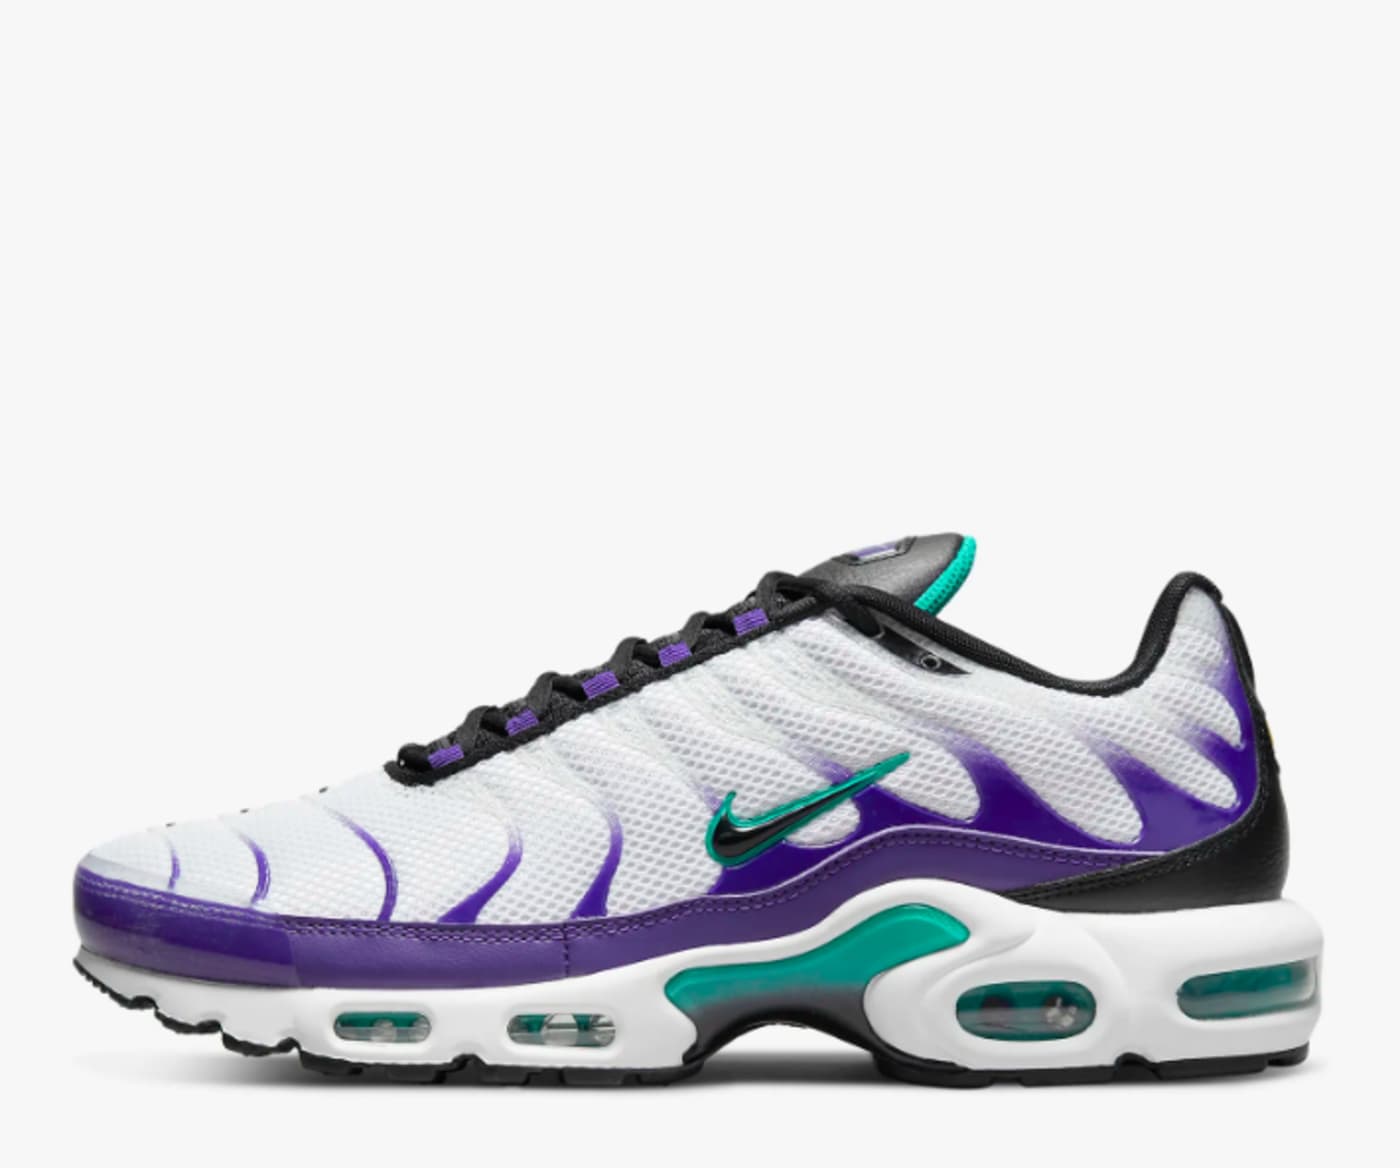 Nike Air Max Plus sneaker discounted for Labor Day 2022